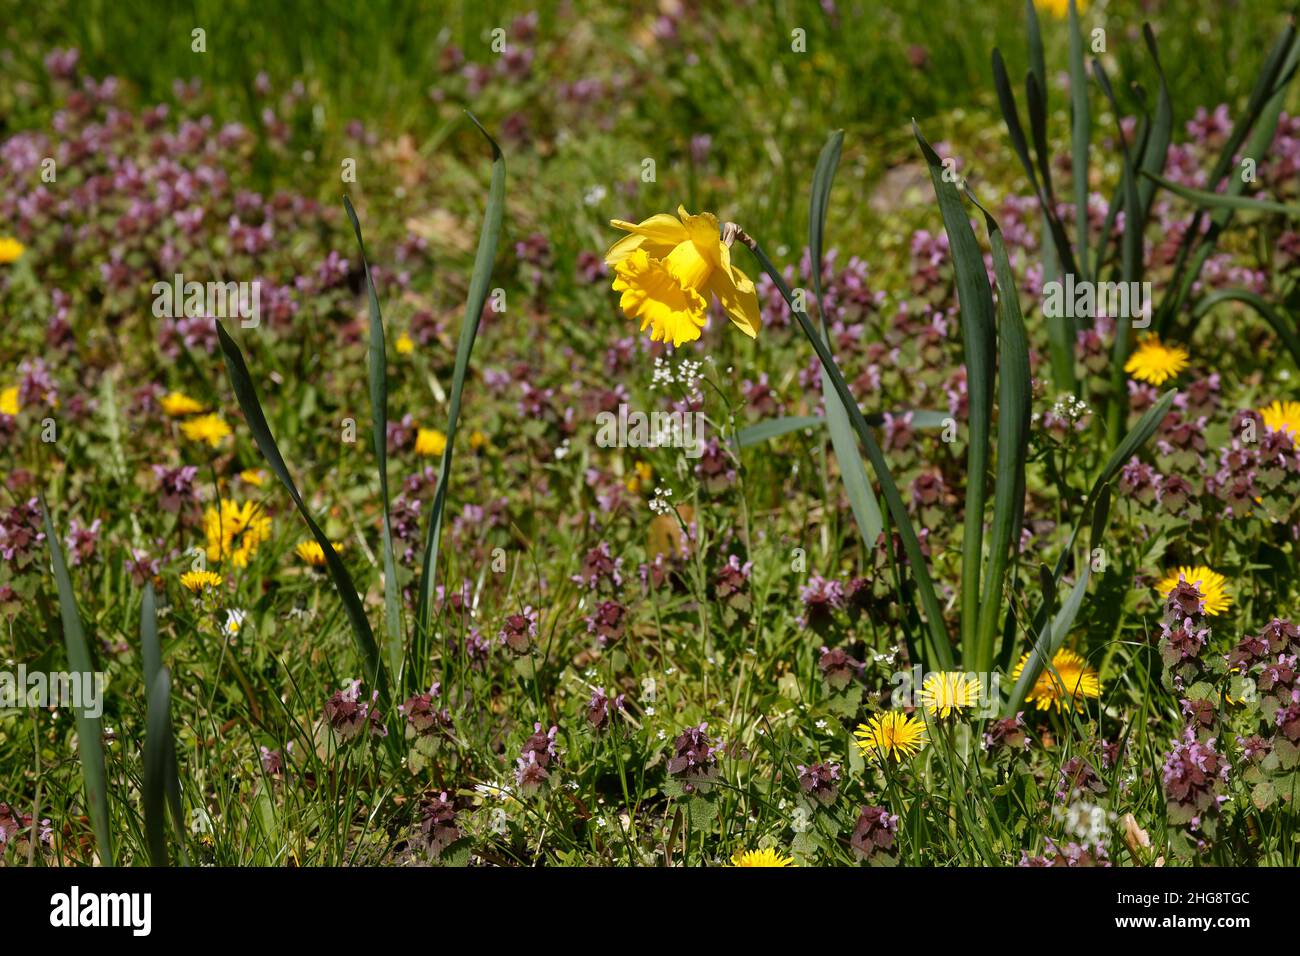 Yellow daffodils, daffodil flower on a flower meadow, (Narcissus Pseudonarcissus), Germany Stock Photo